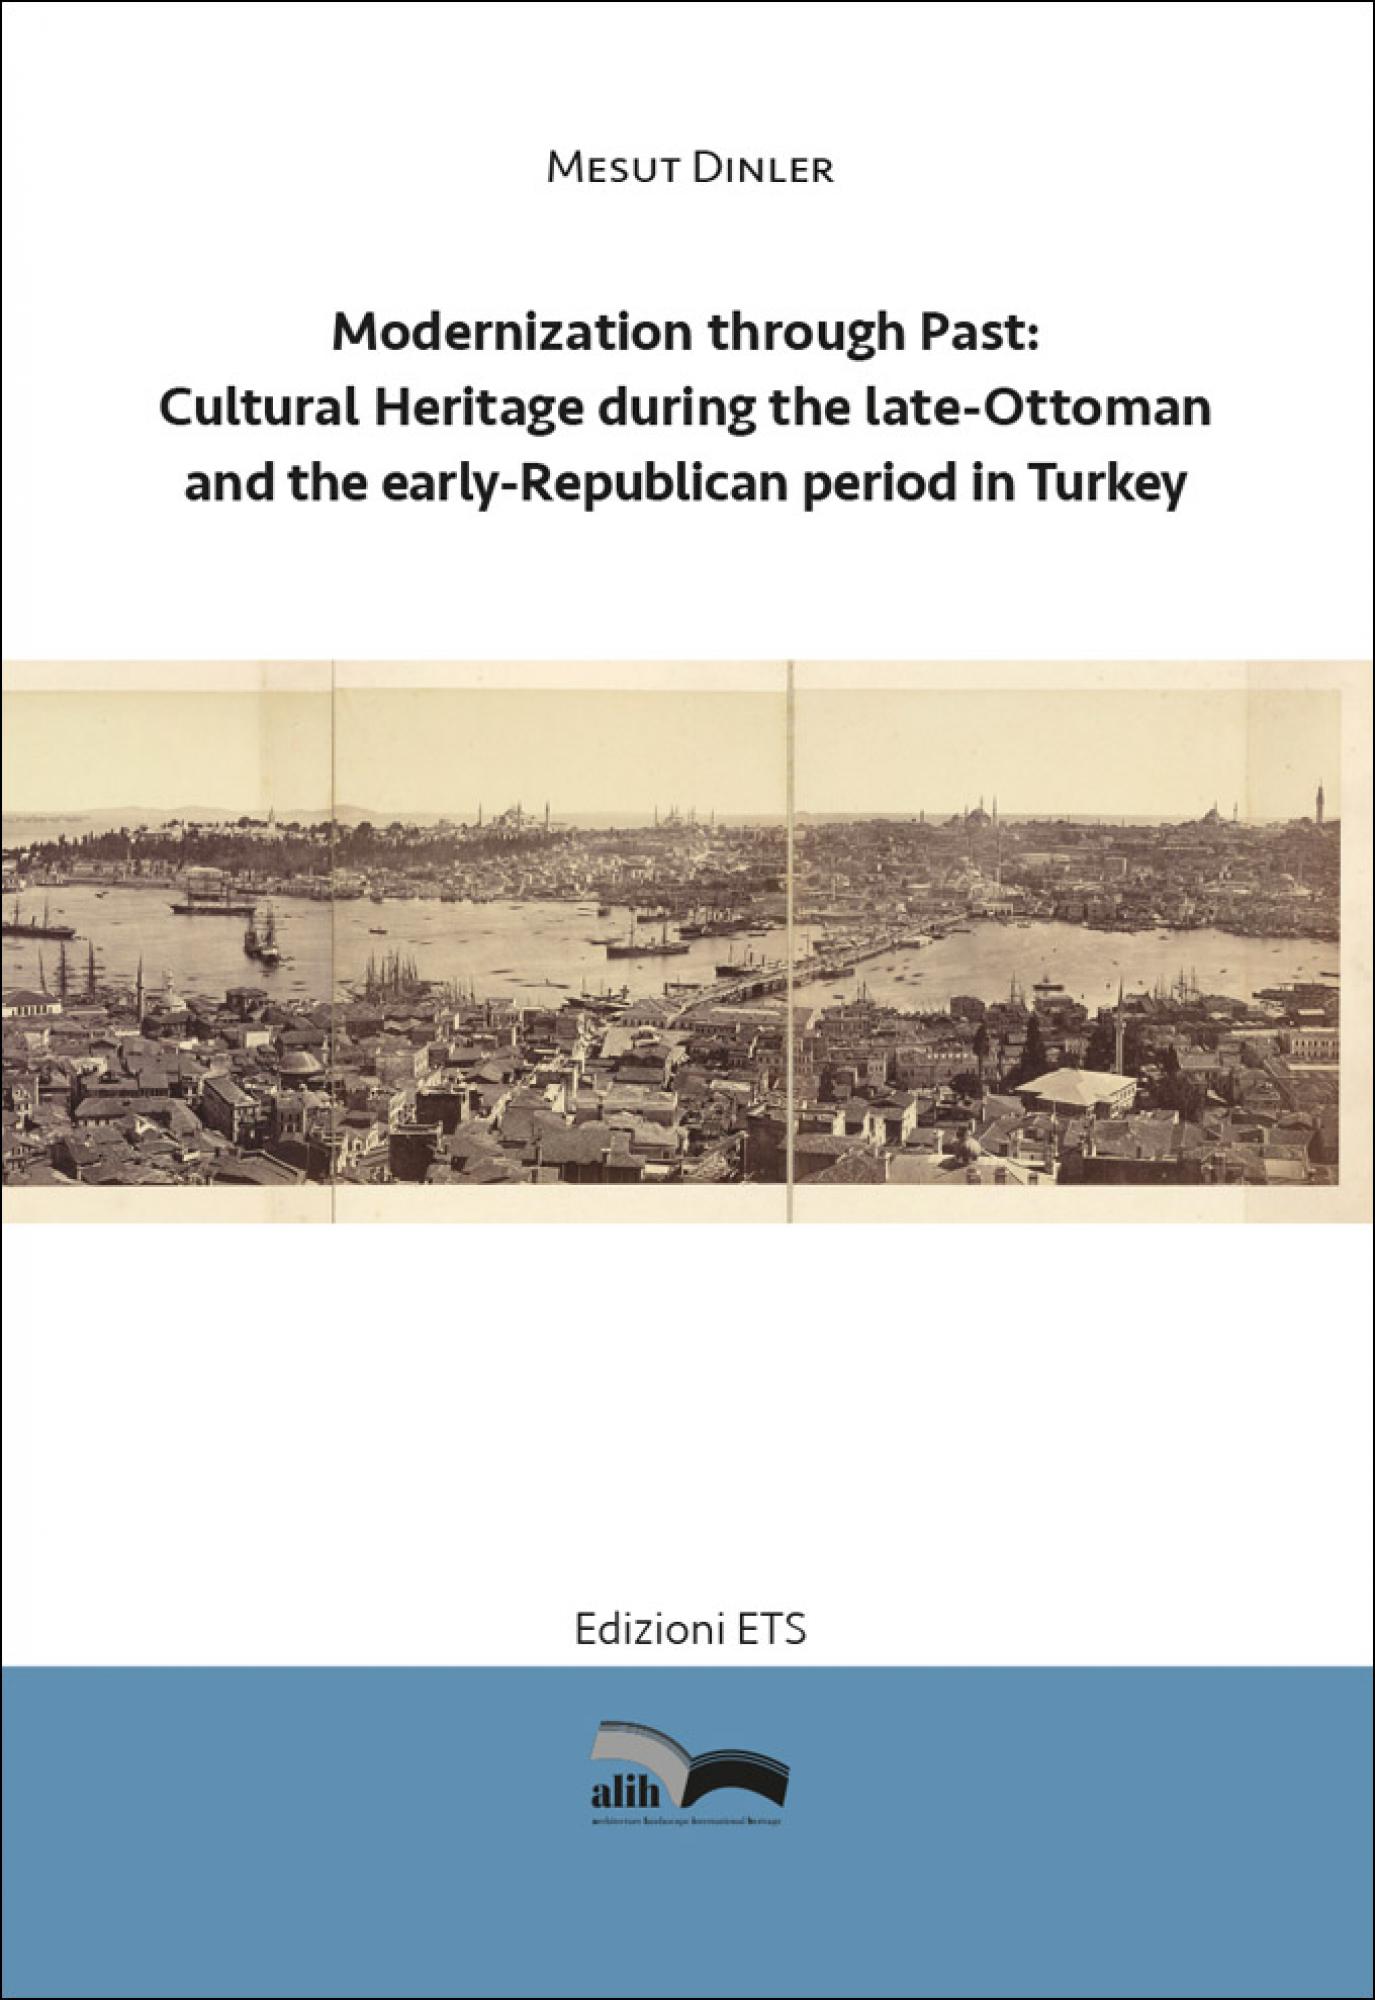 Modernization through Past.Cultural Heritage during the late-Ottoman and the early-Republican period in Turkey